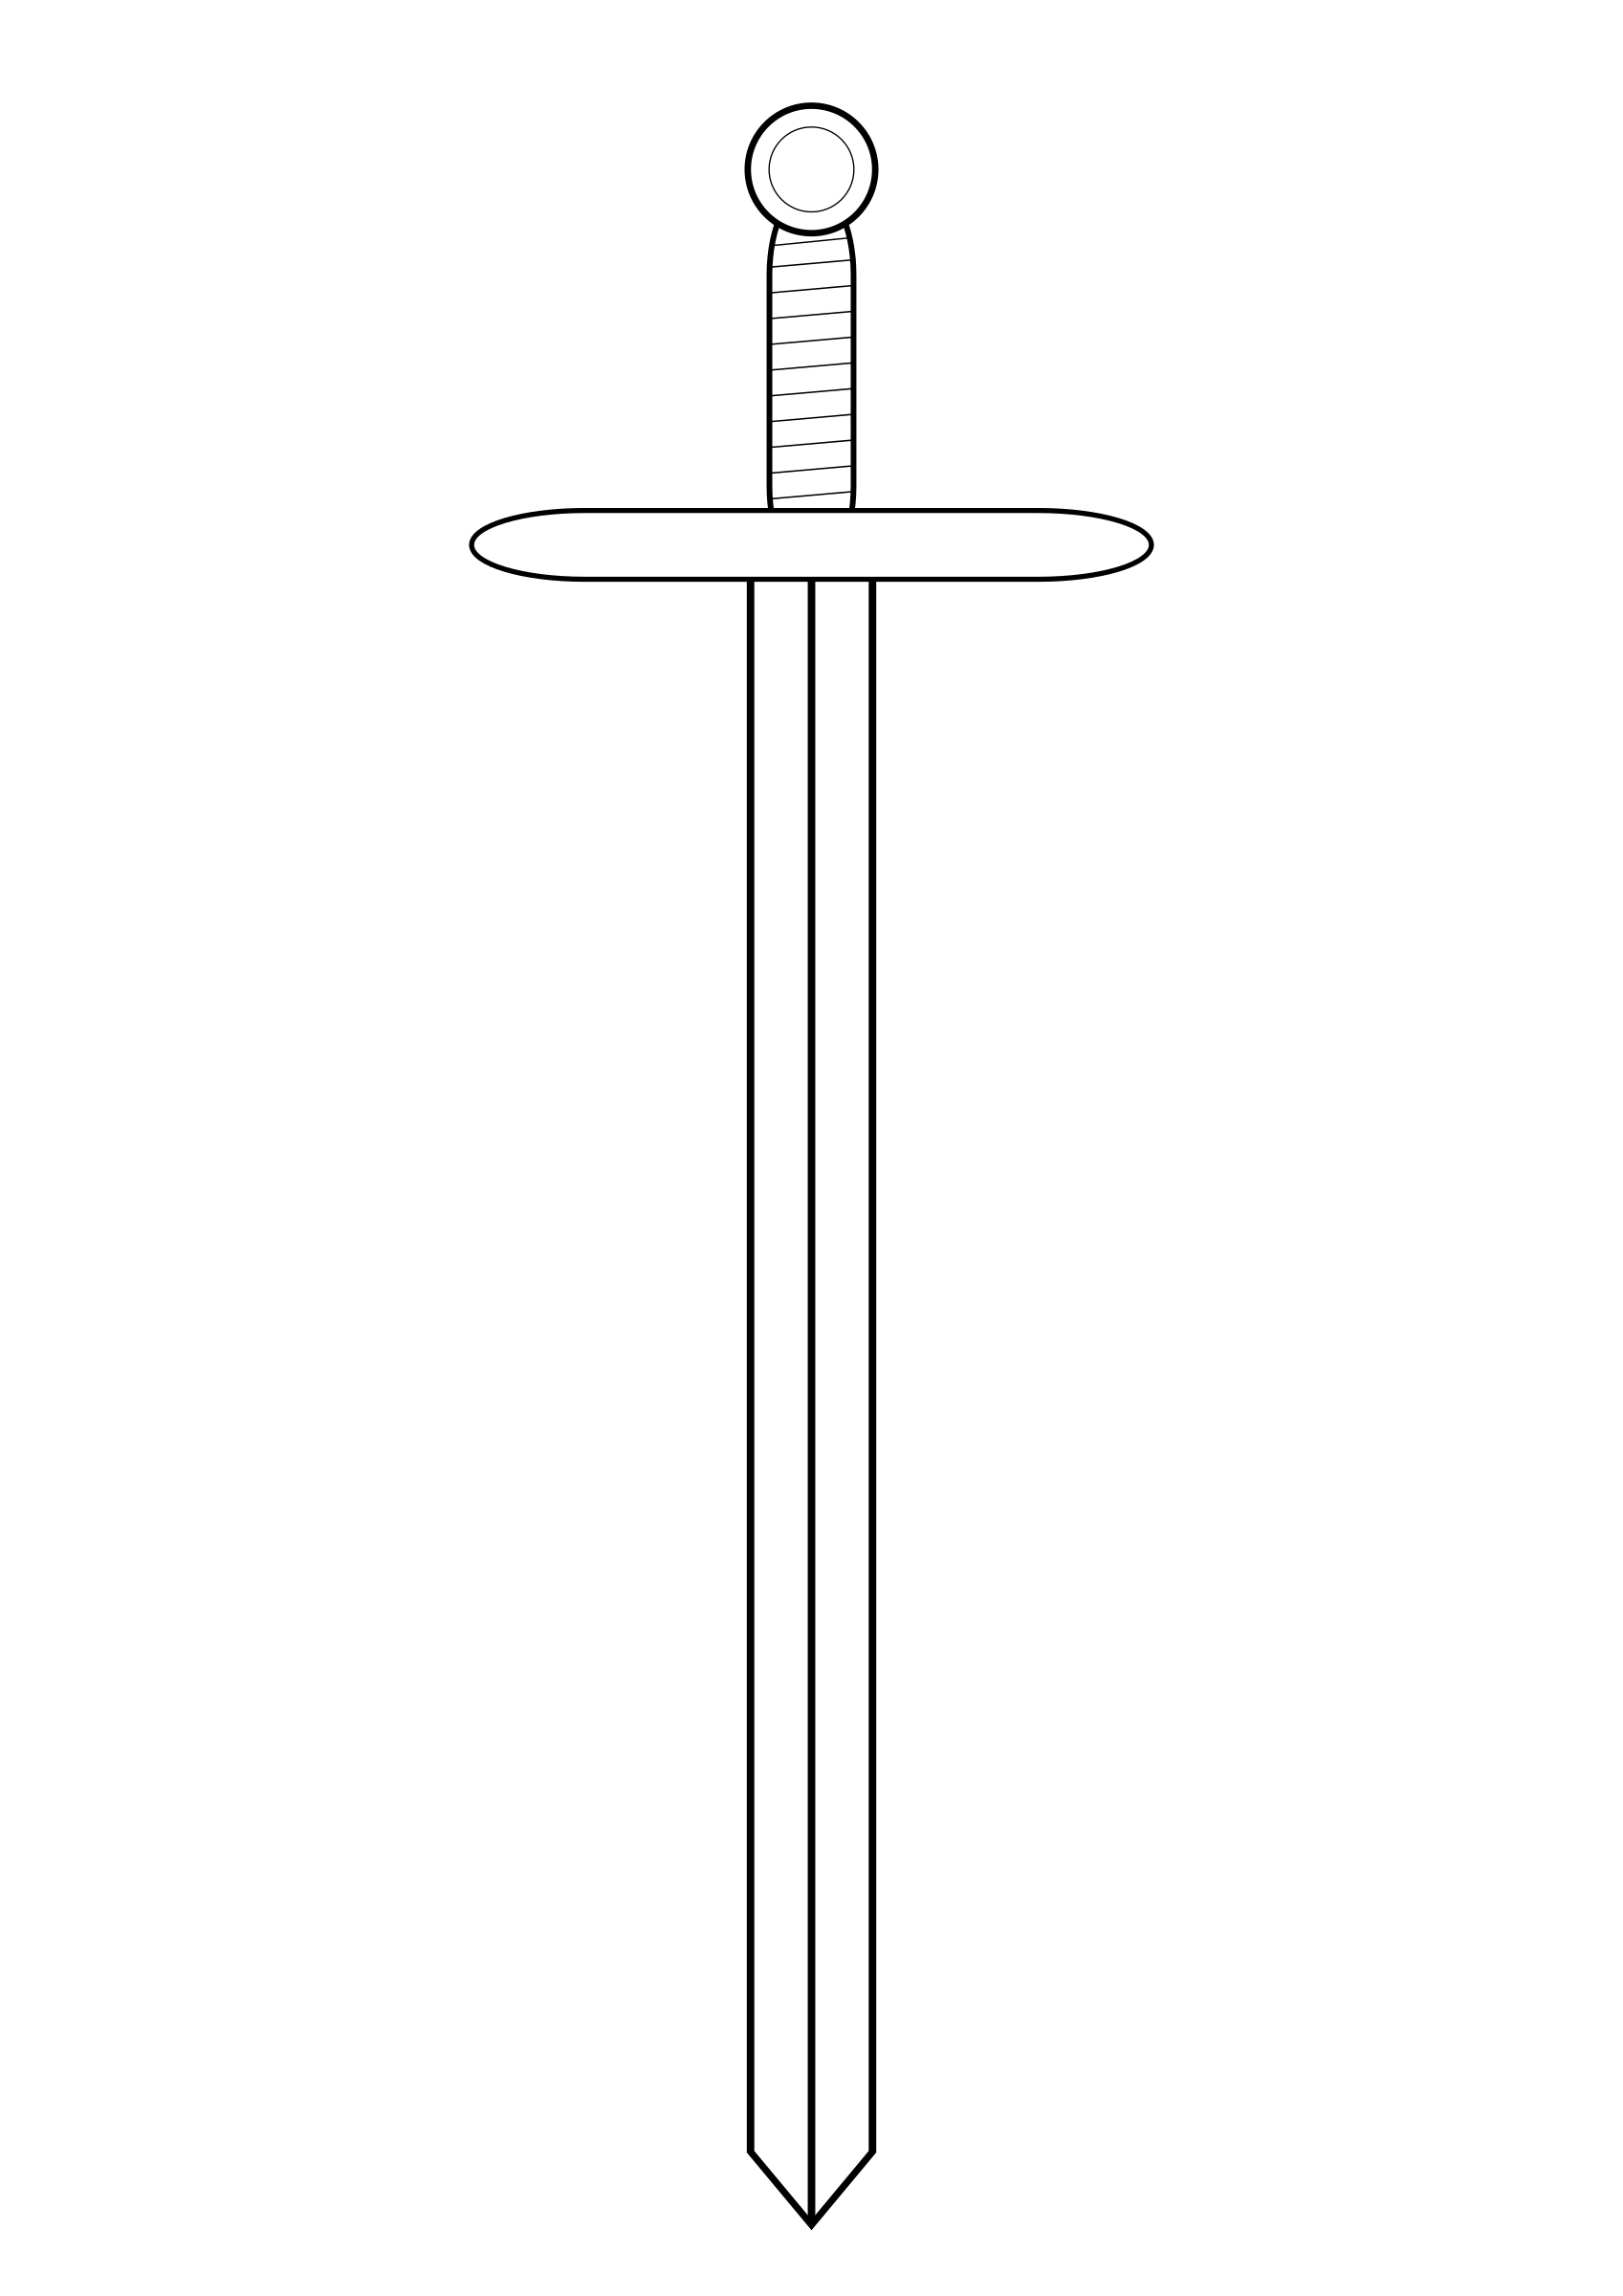 sword outline clipart - Clipground